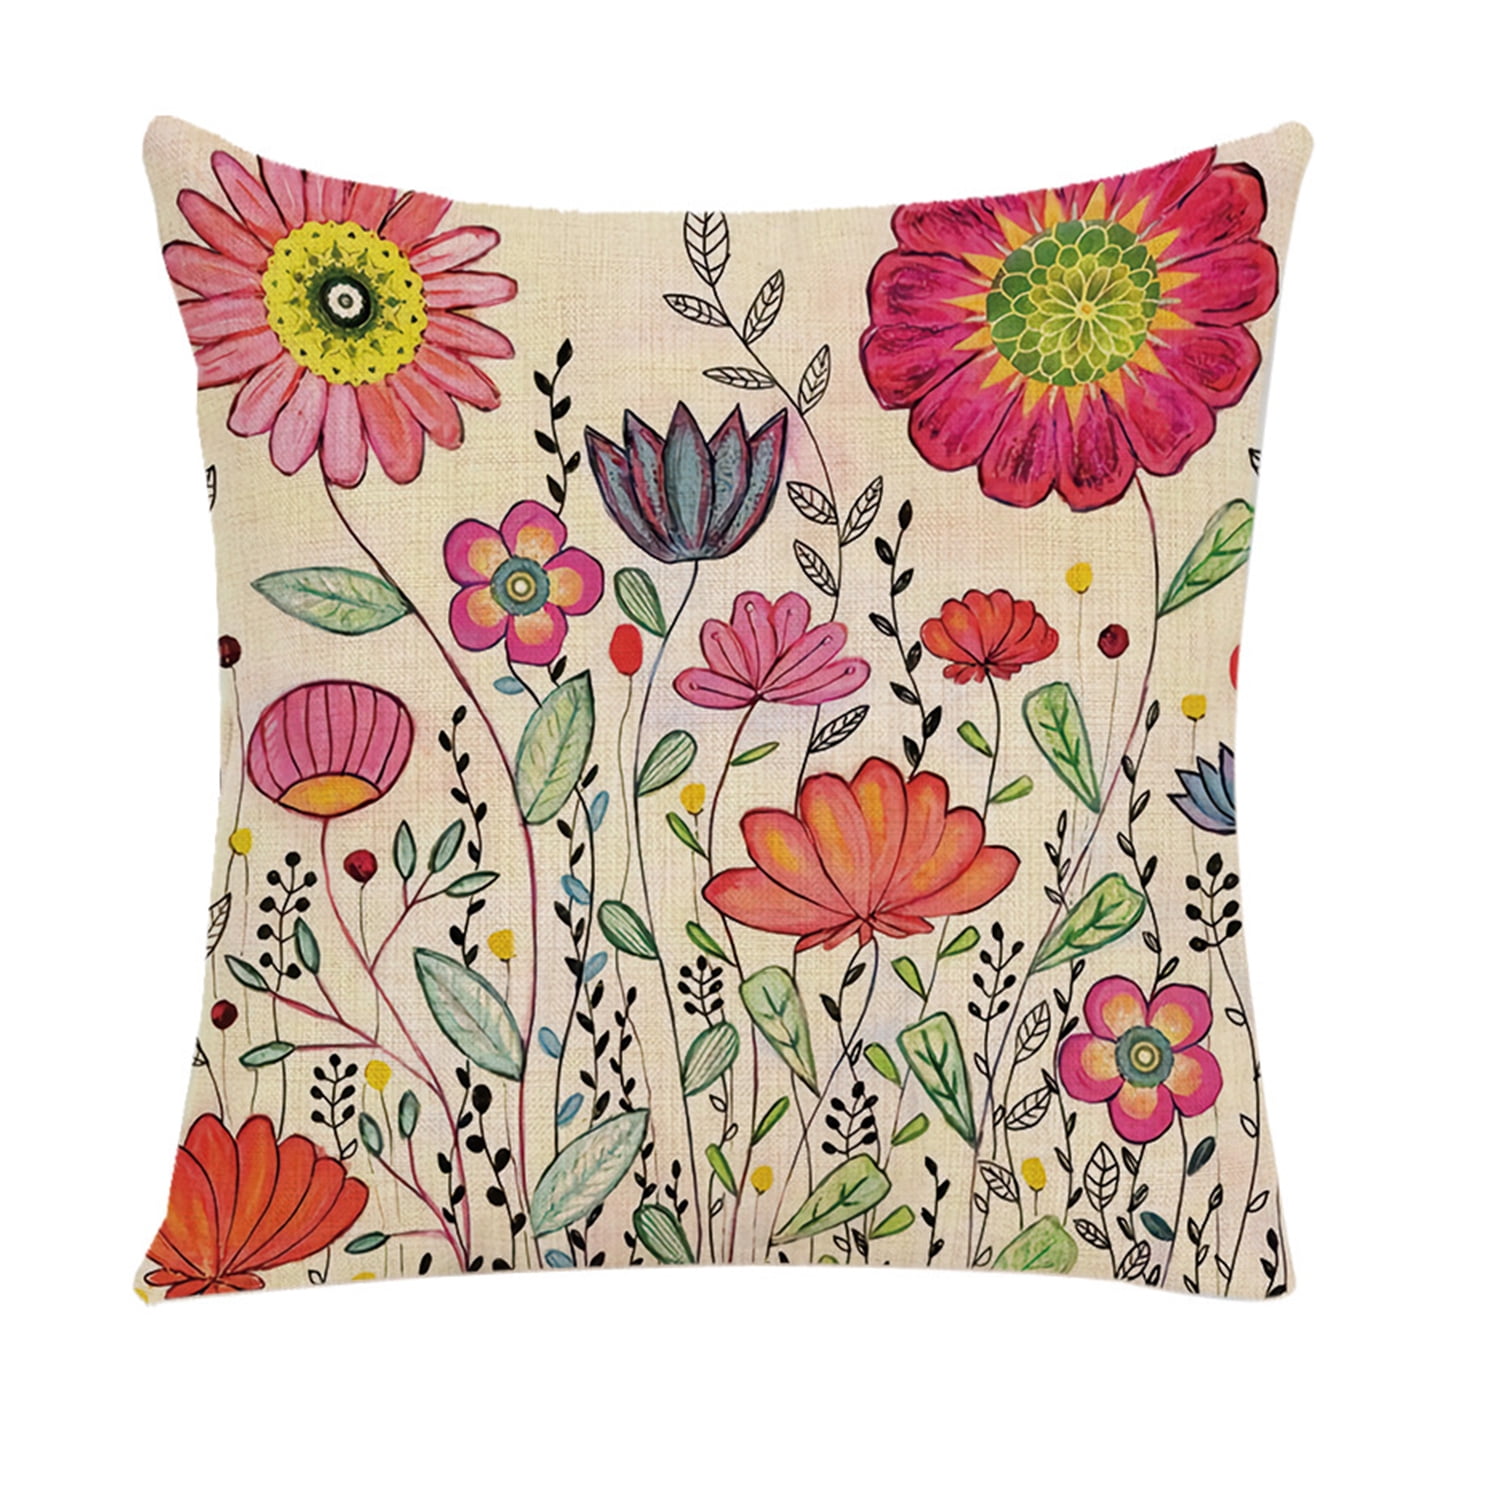 Cherry Blossom Tree - Decorative Pillow Cover - 18x18 inch – Cotton and  Crate